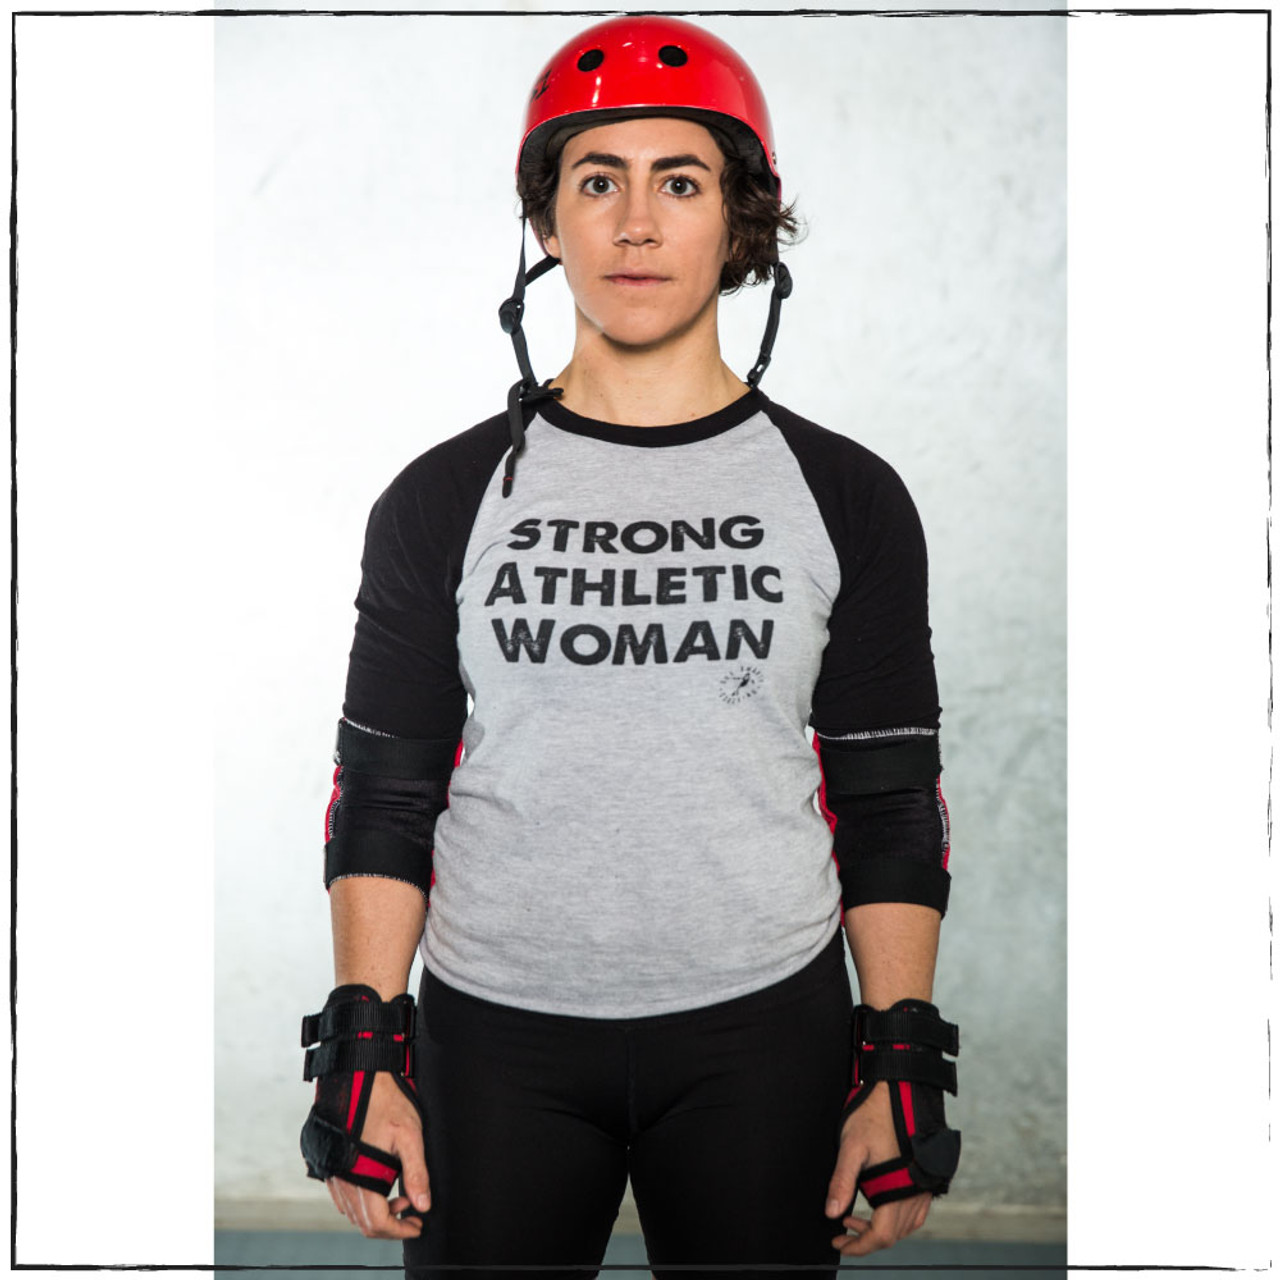 Sold Out! Crop Tops for Women in Sports the Strong Athletic Woman White  Crop Top with Black Ink by Strong Athletic